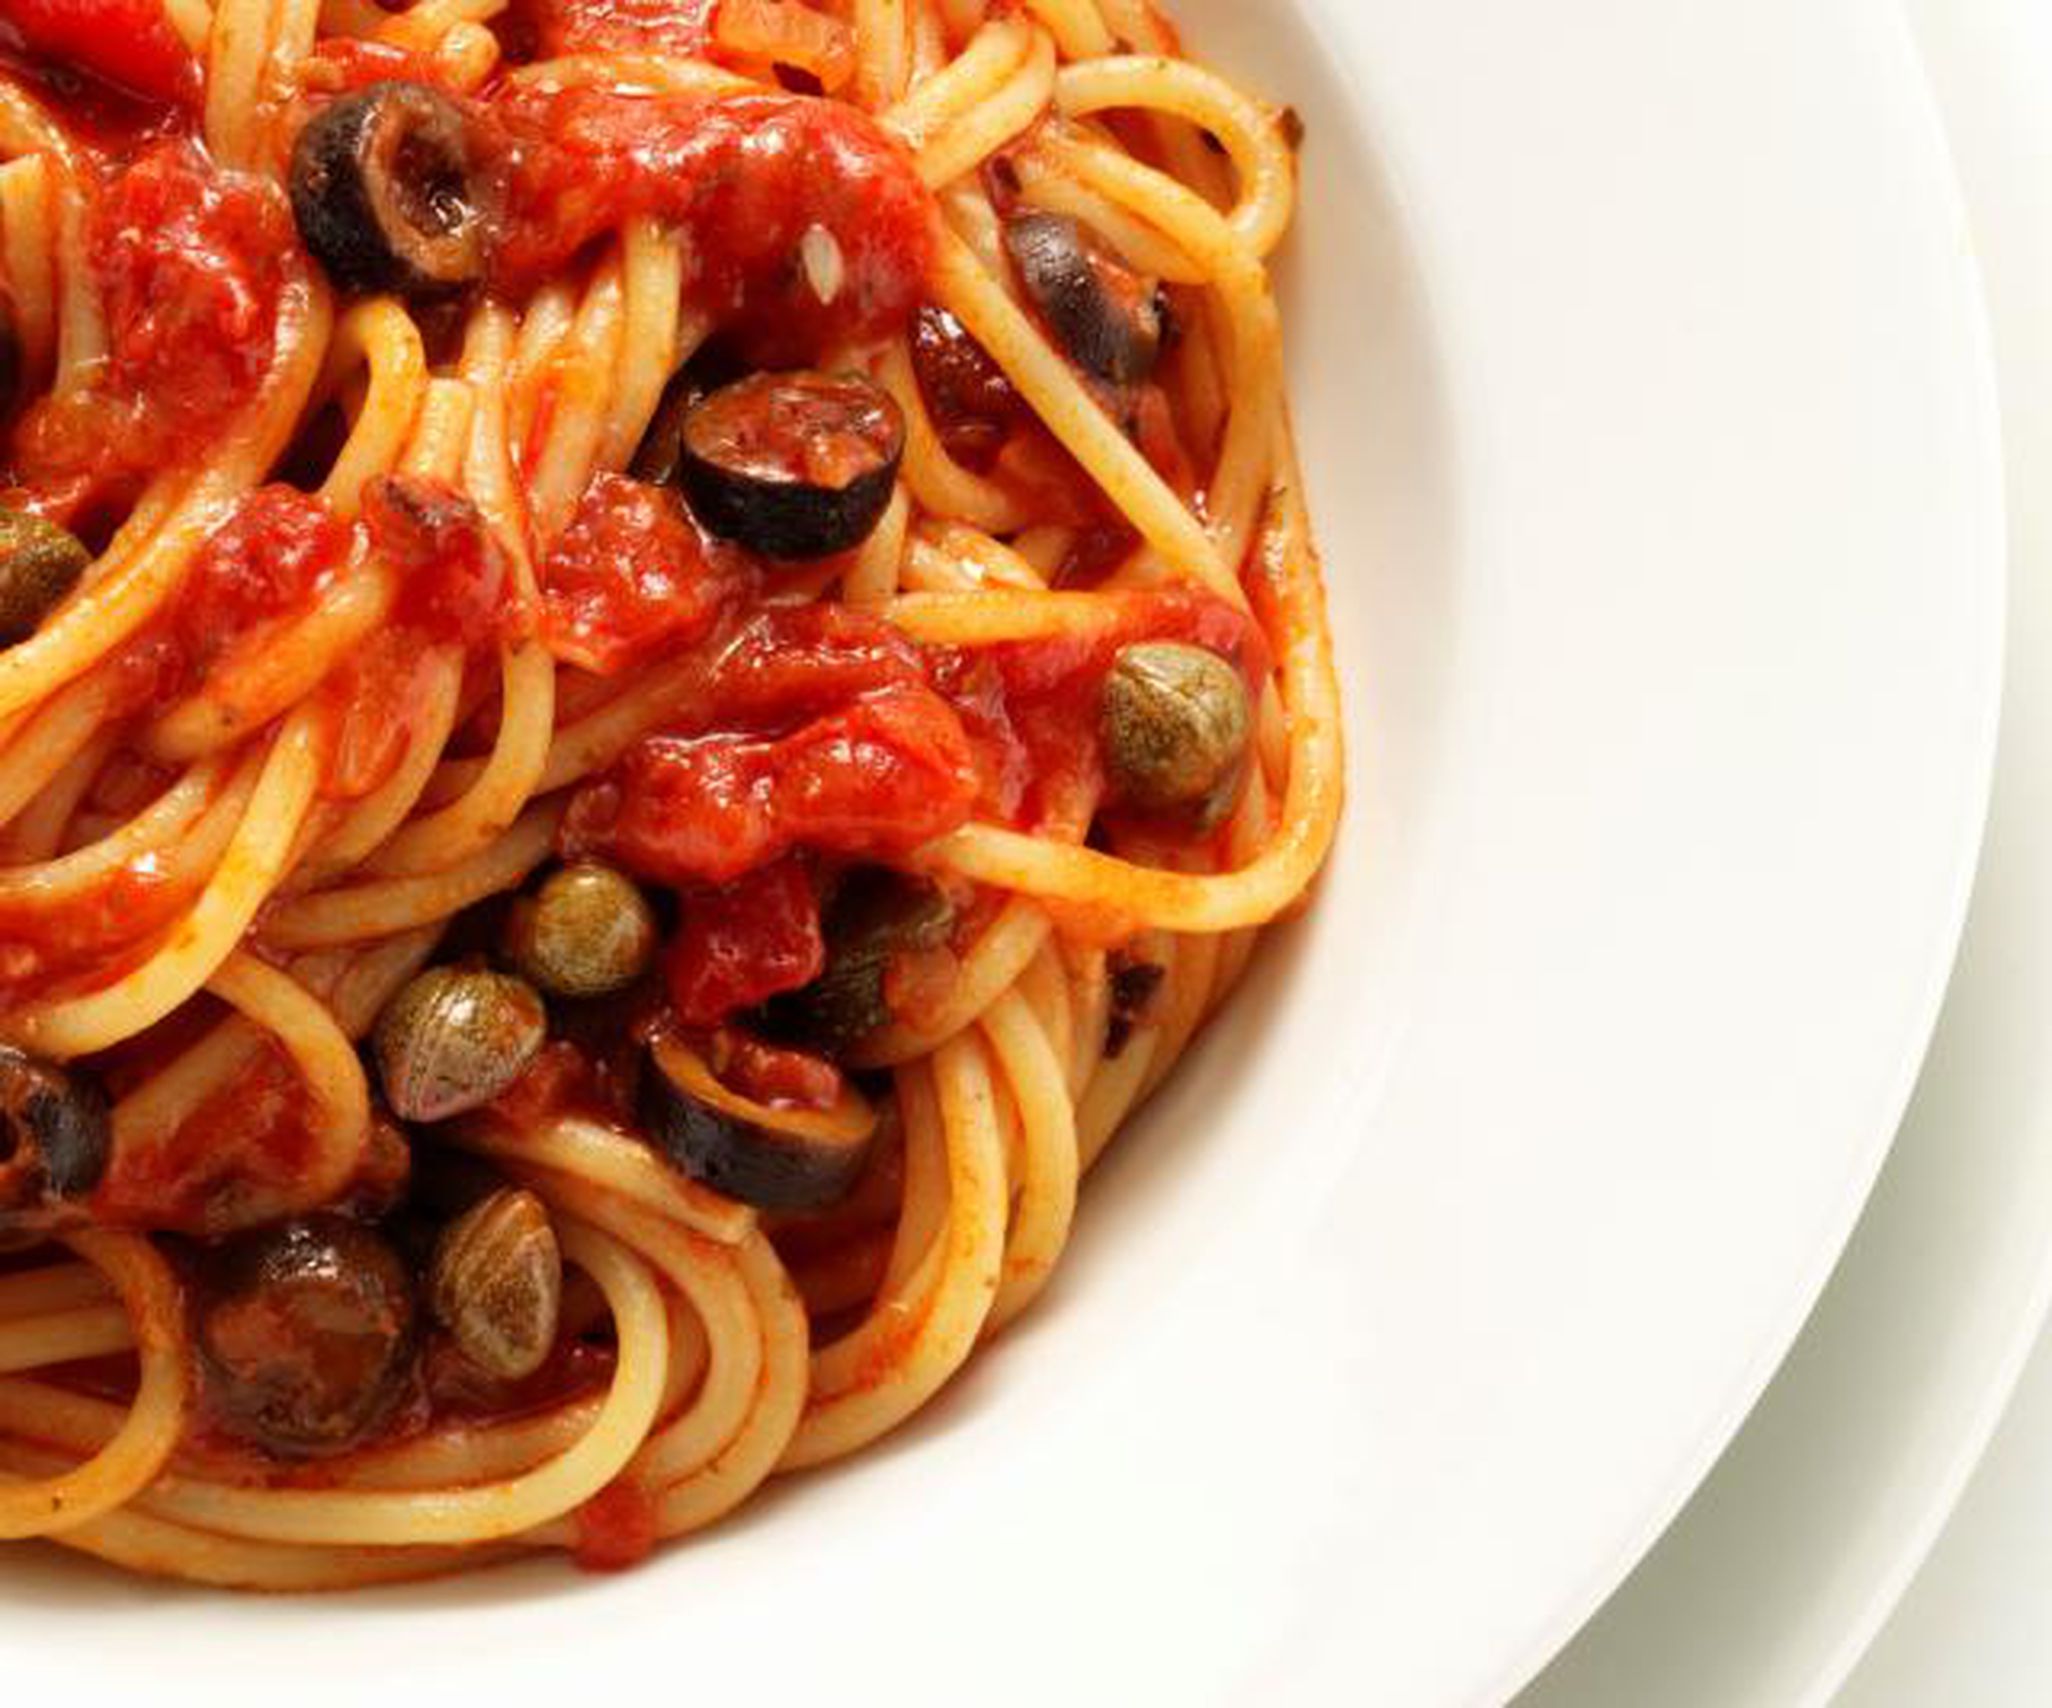 Vegan Pasta Puttanesca Recipe With Capers and Olives